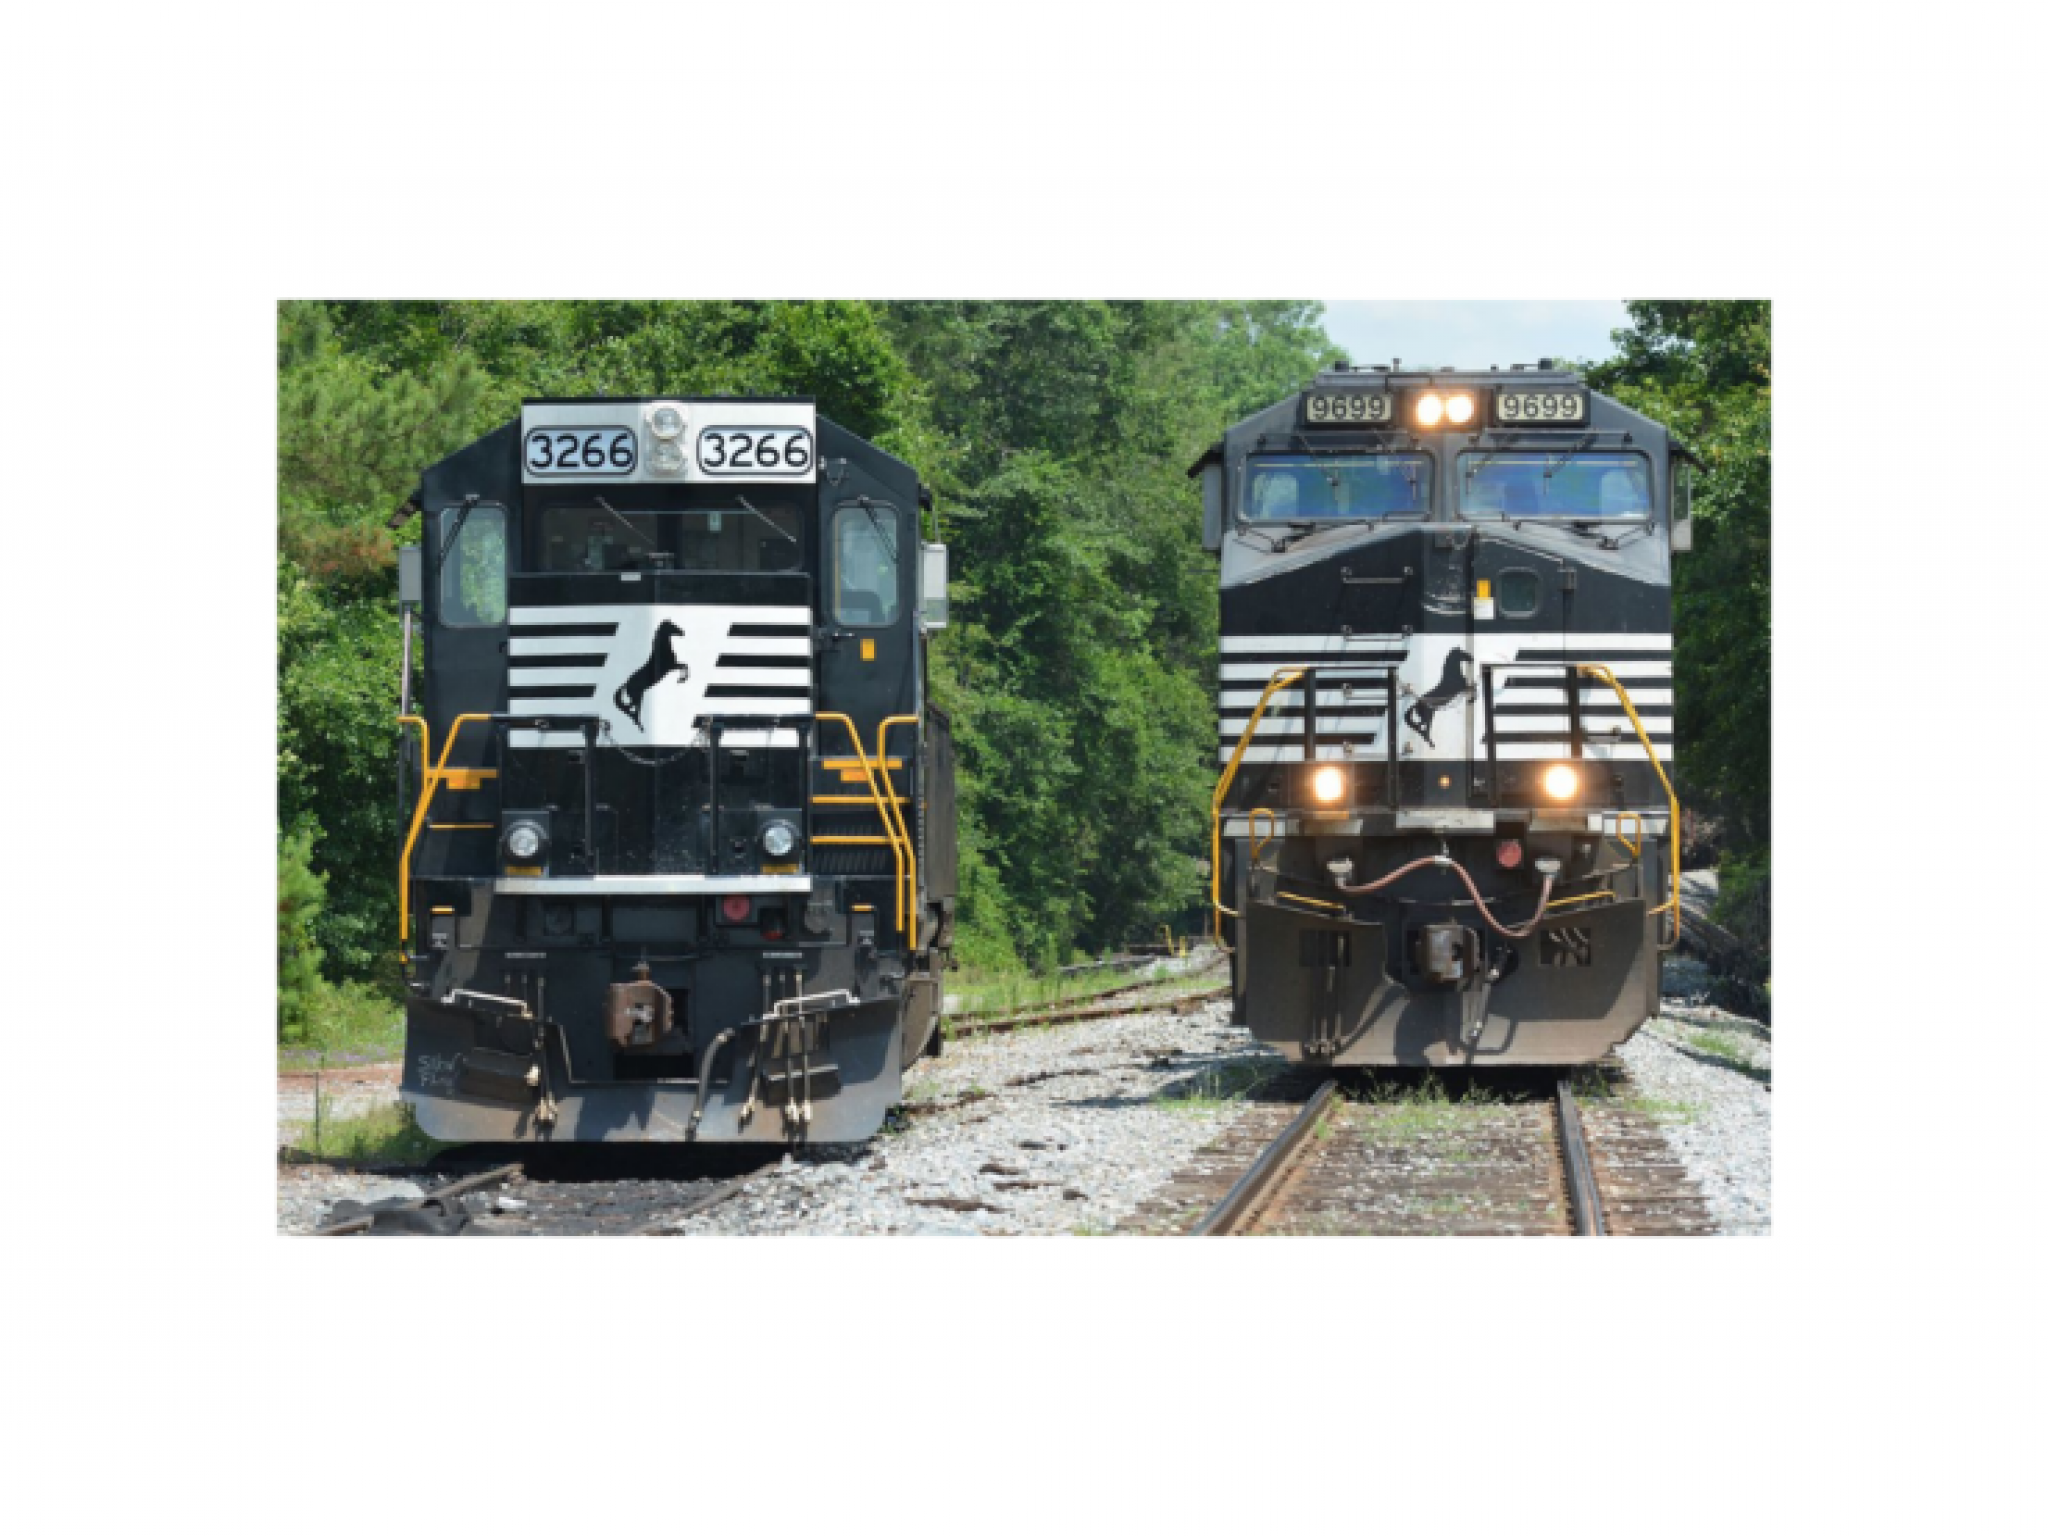  norfolk-southern-poised-for-long-term-efficiency-analyst-projects-improved-operating-ratios 